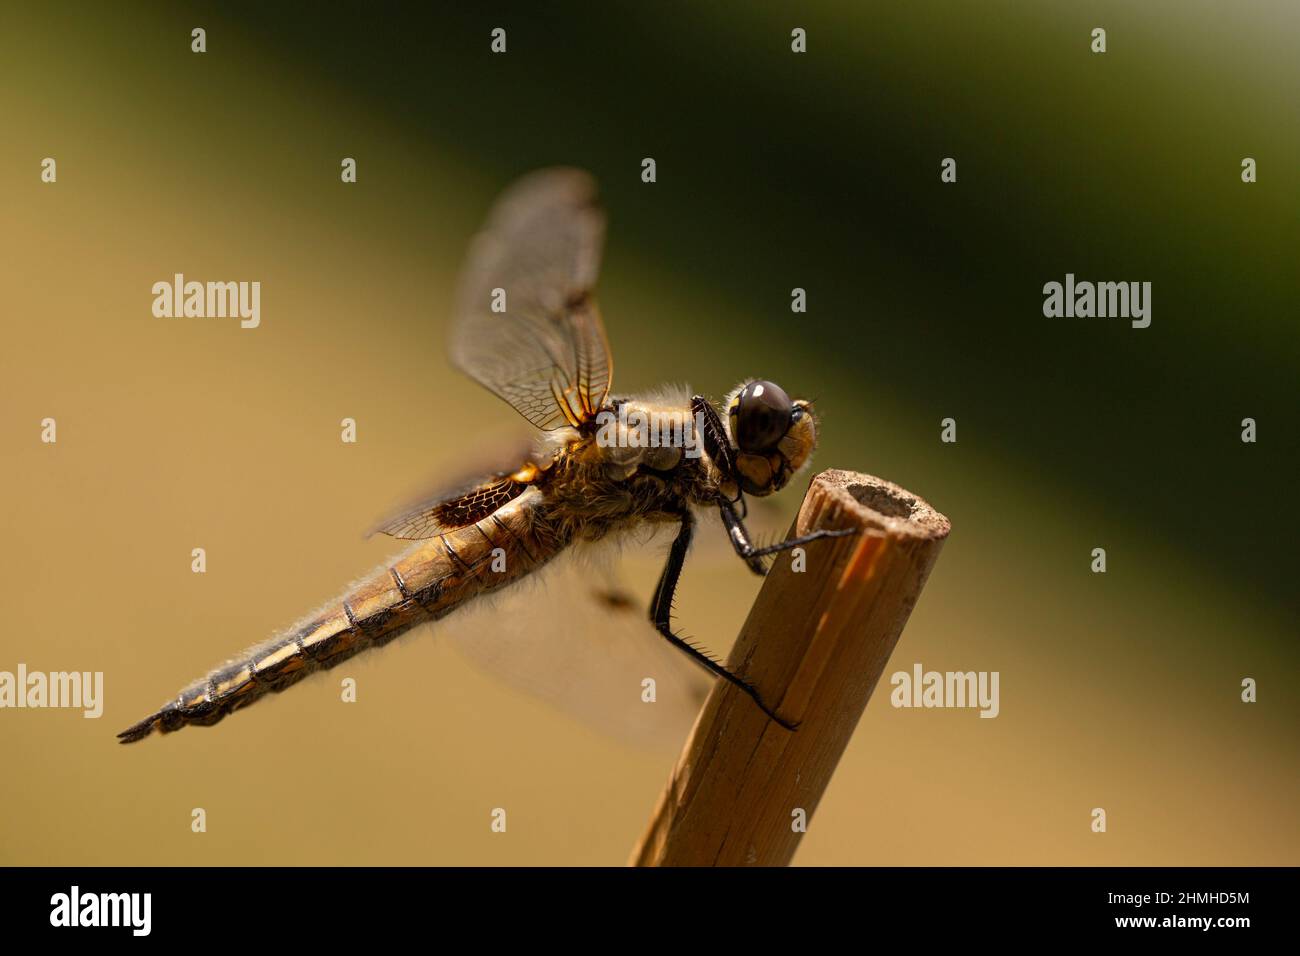 Dragonfly resting on a flower stick, blurred nature background, Finland Stock Photo